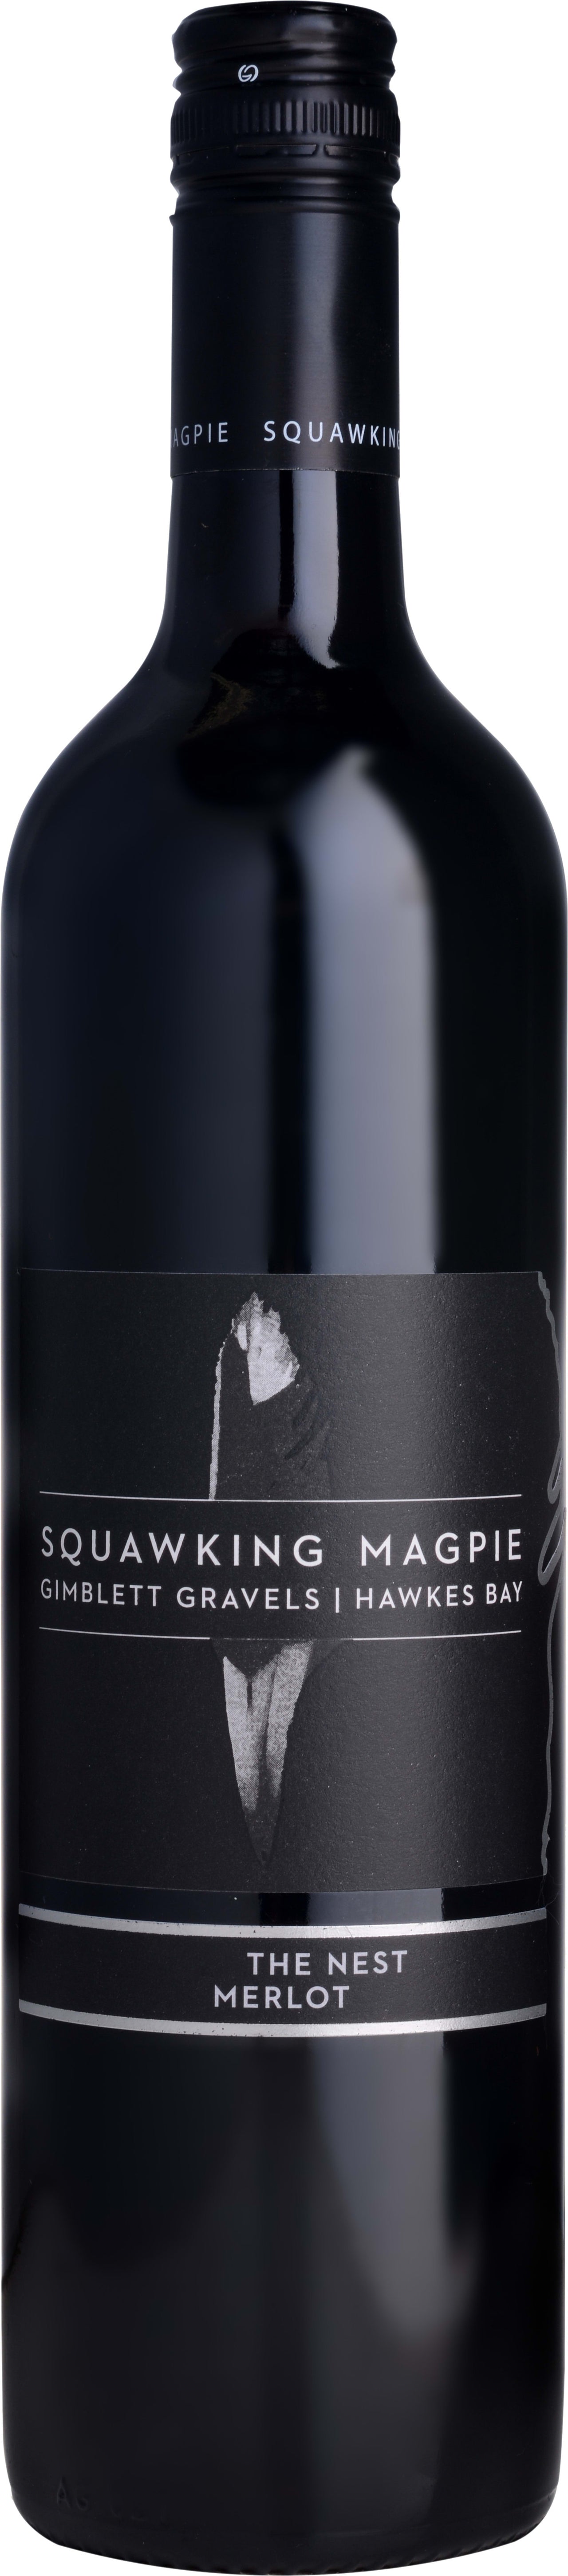 Squawking Magpie The Nest Merlot 2014 75cl - Buy Squawking Magpie Wines from GREAT WINES DIRECT wine shop